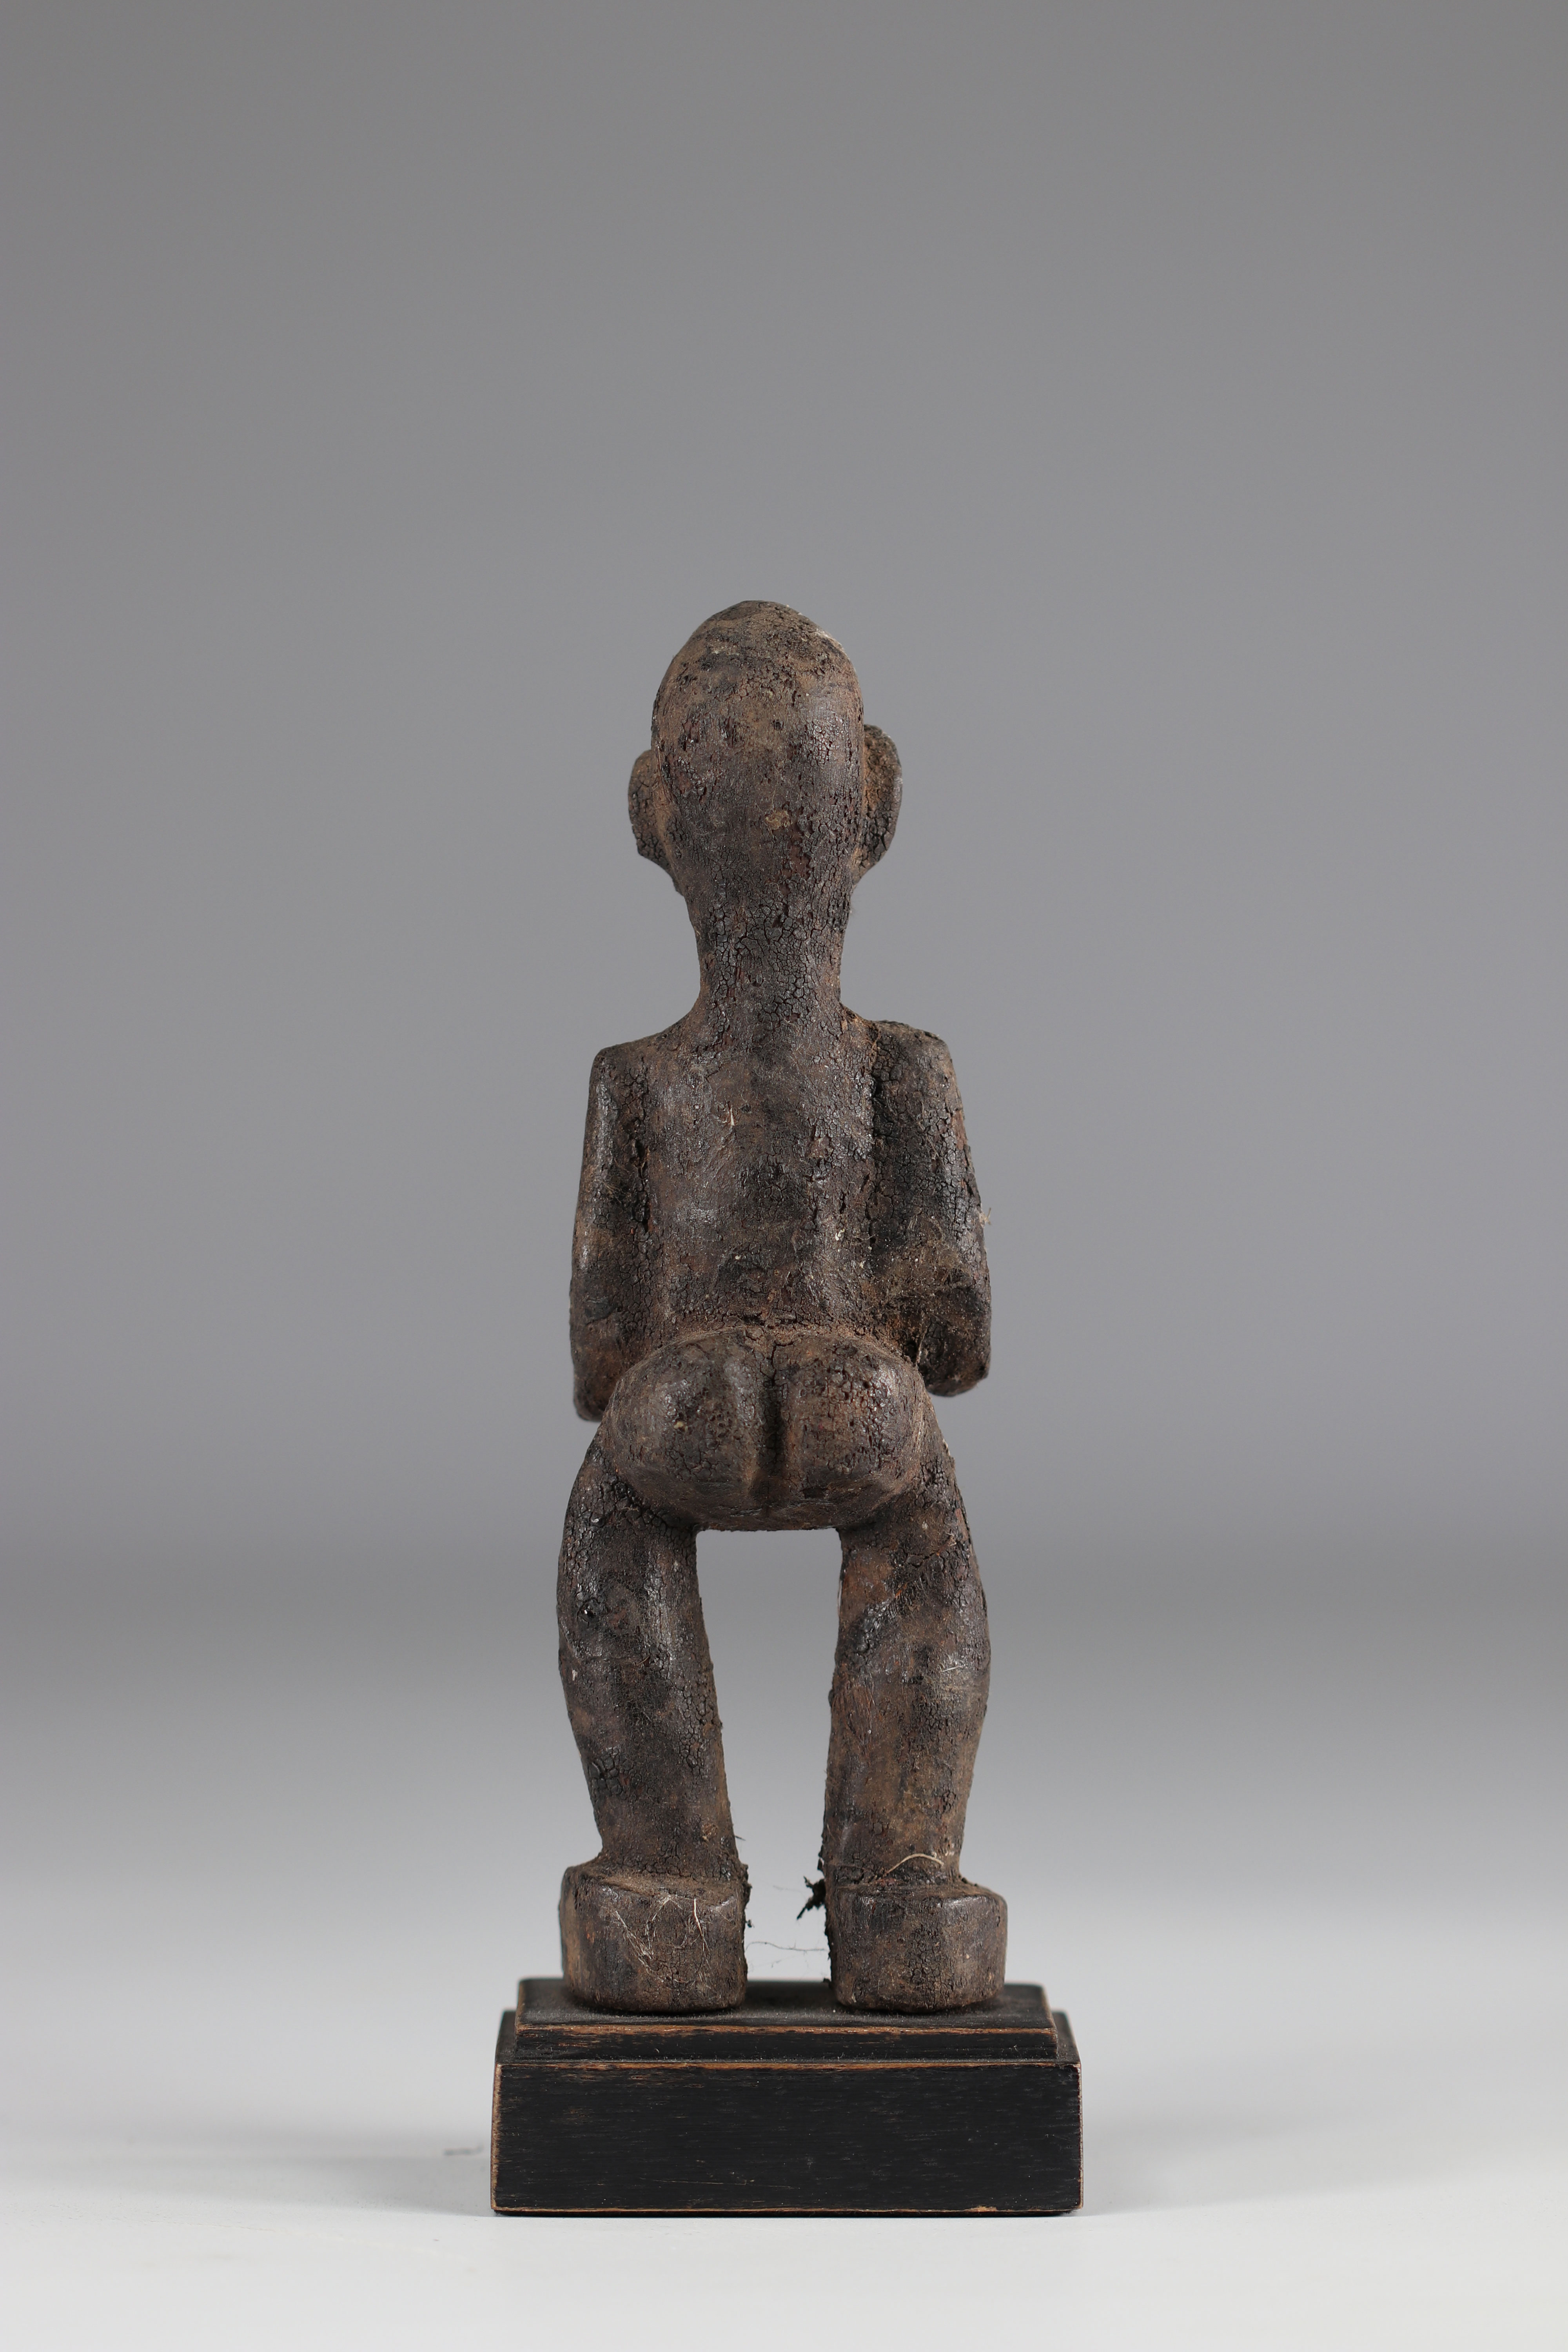 Kassena-Rare statuette and old Kassena statuette (Burkina Faso). Dense wood covered with a thick sac - Image 3 of 4